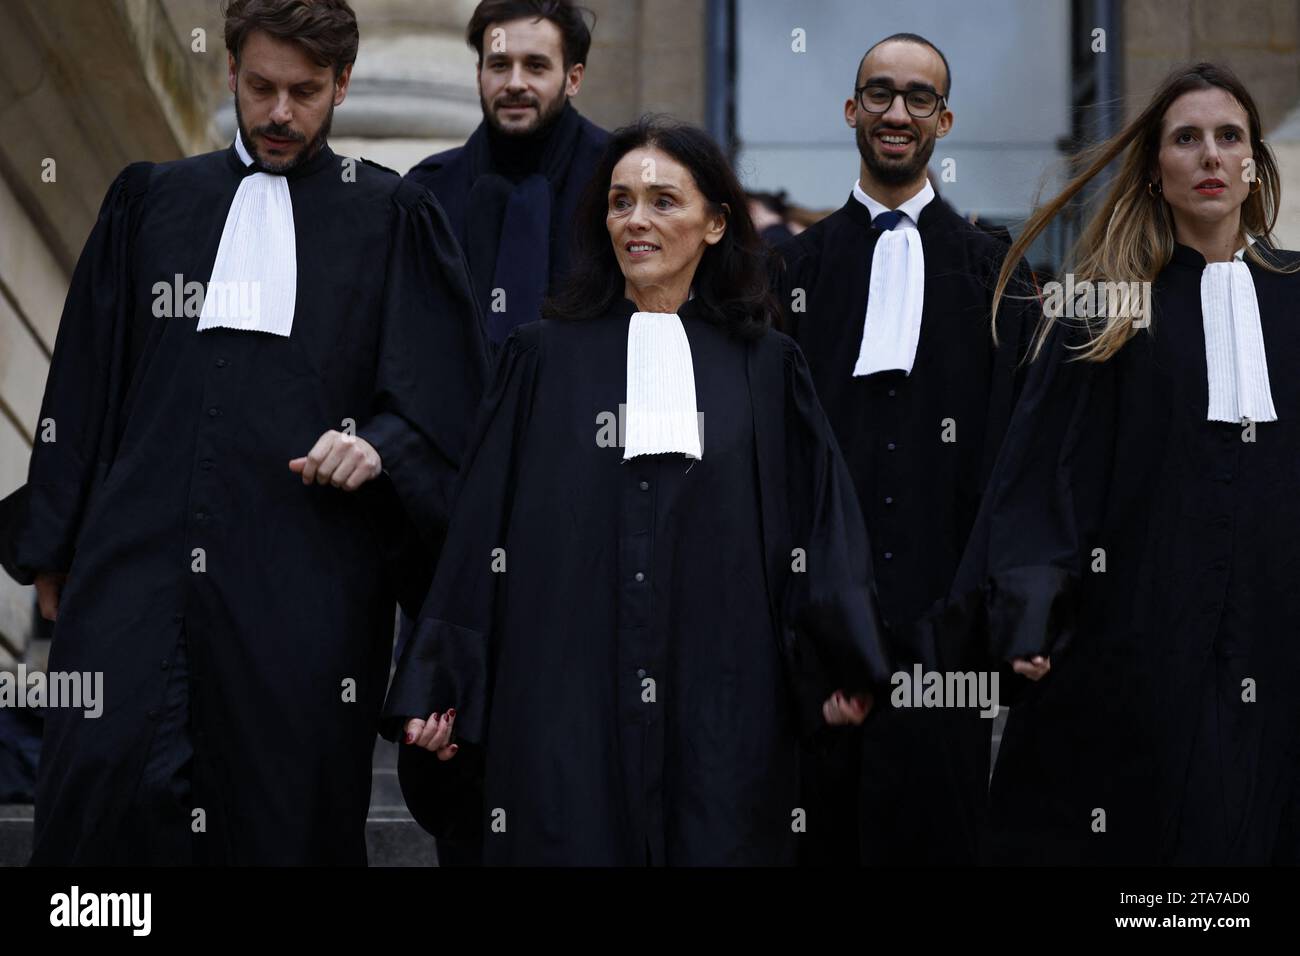 French Justice Minister's lawyers Jacqueline Laffont leaves the court after the court's verdict at Paris' courthouse for the last day of the Minister's trial over alleged conflicts of interest and abuse of office, in Paris, on November 29, 2023. A French court on November 29, 2023, acquitted France's justice minister in a conflict of interest trial that has been an embarrassment for French President's government. Eric Dupond-Moretti, a pugnacious former star defence lawyer, had in 2021 been charged with misusing his position to settle scores with opponents from his legal career. He stood trial Stock Photo